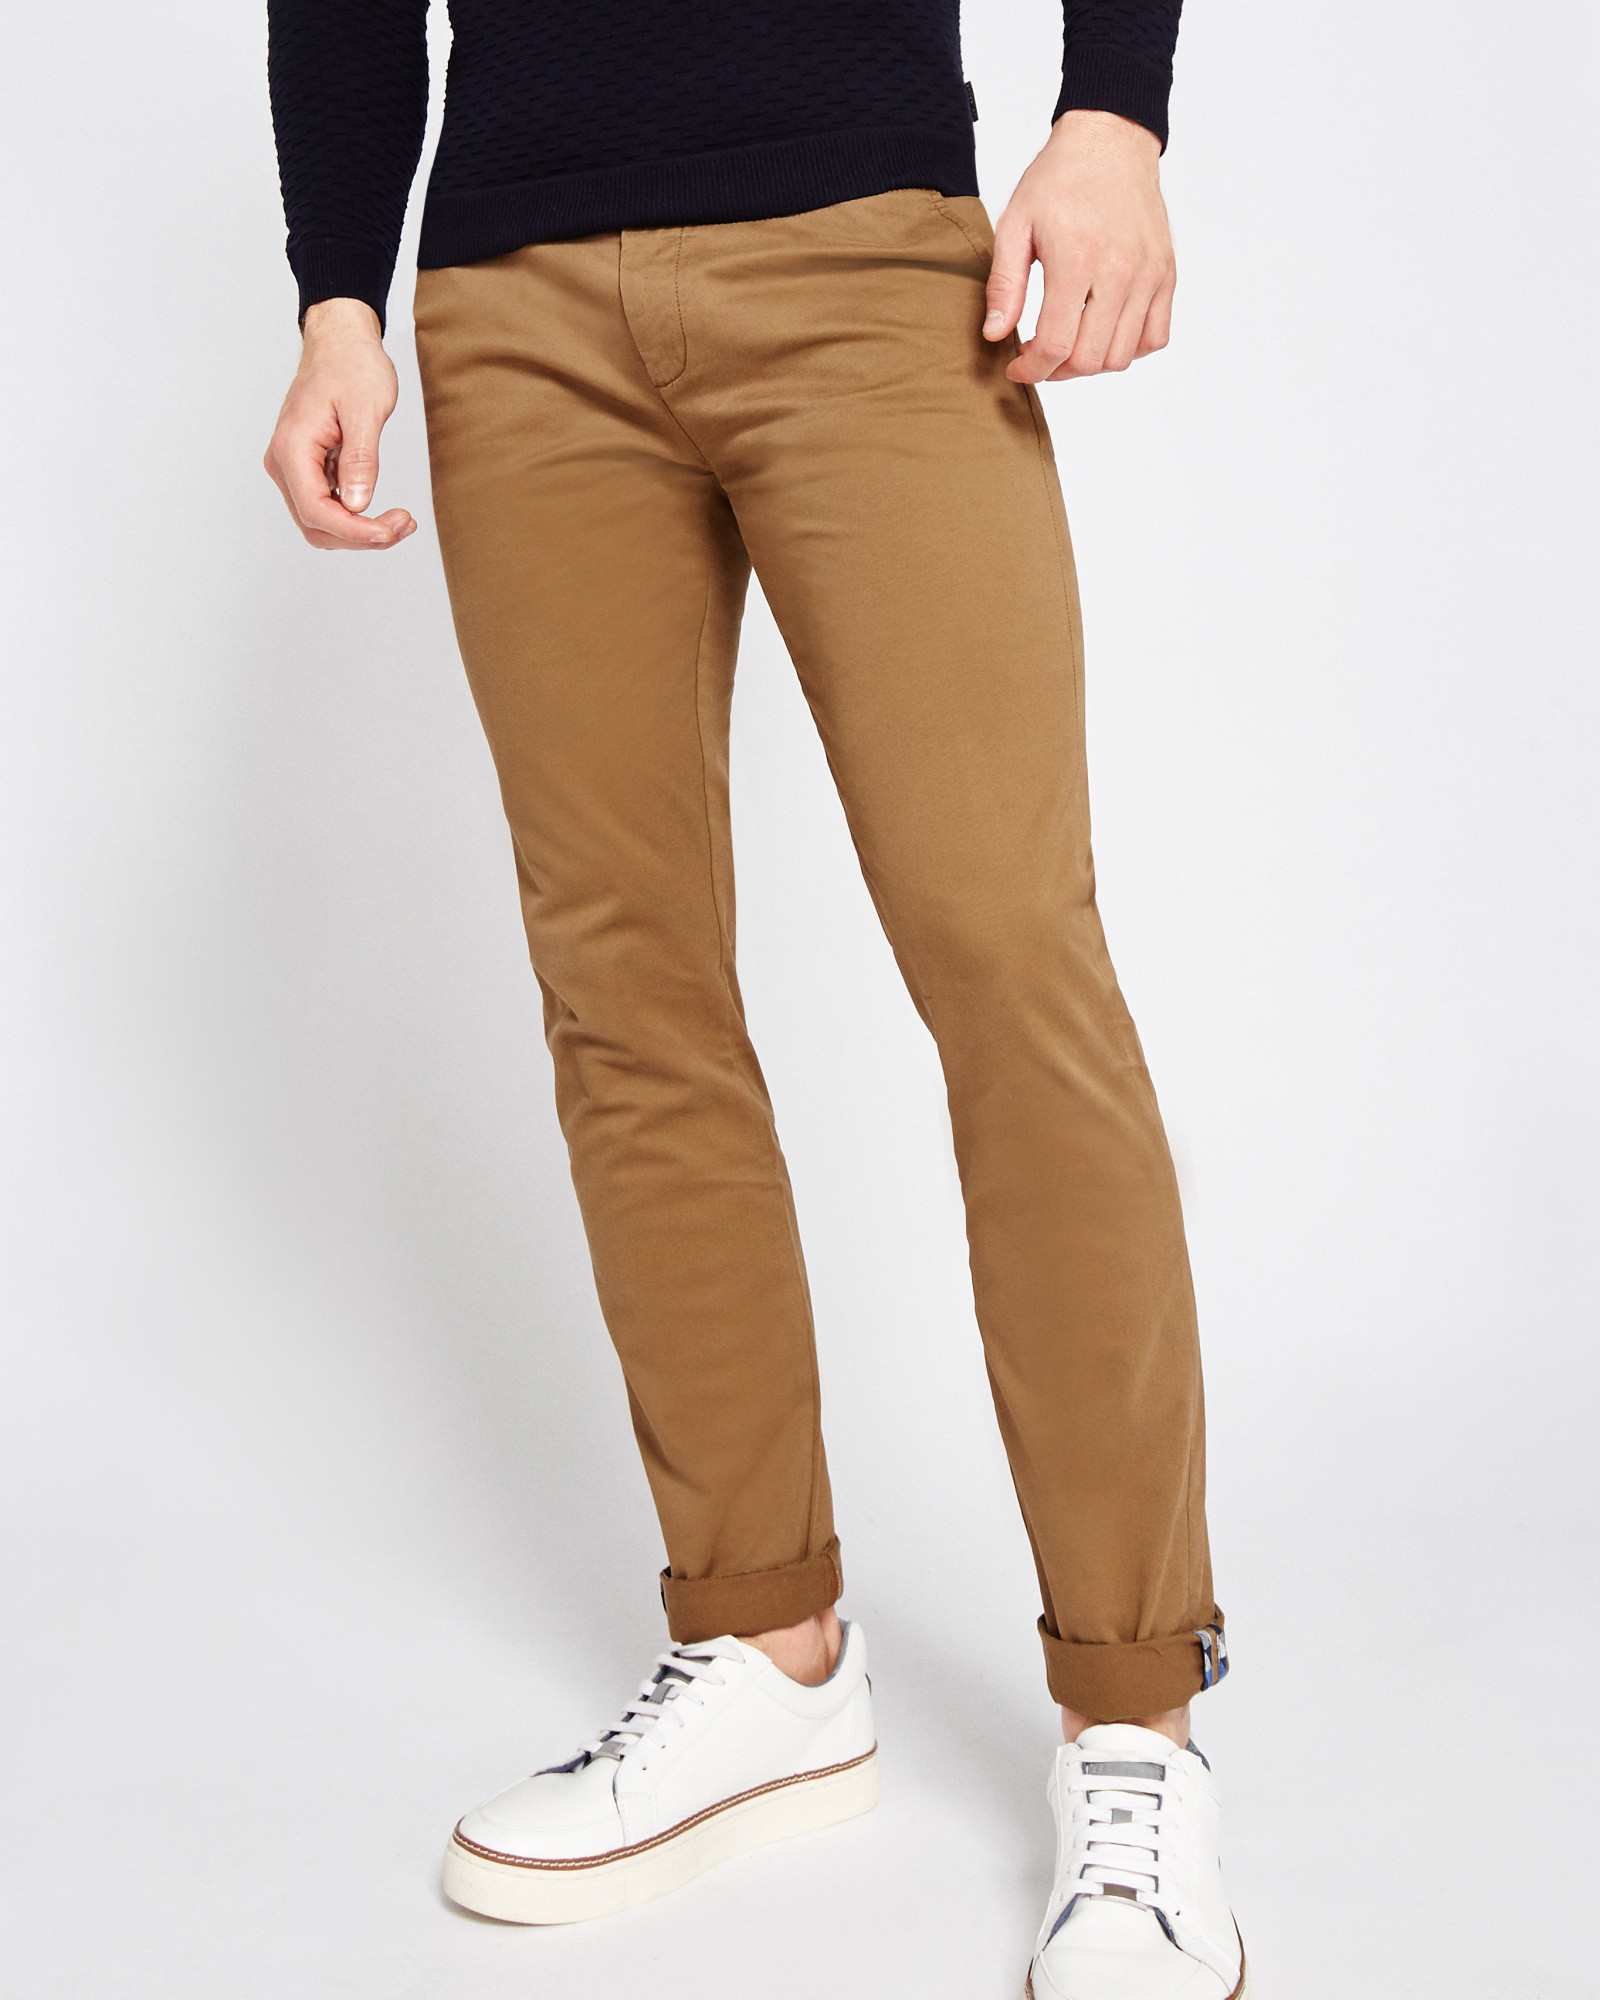 TAPCOR Tapered fit cotton chinos